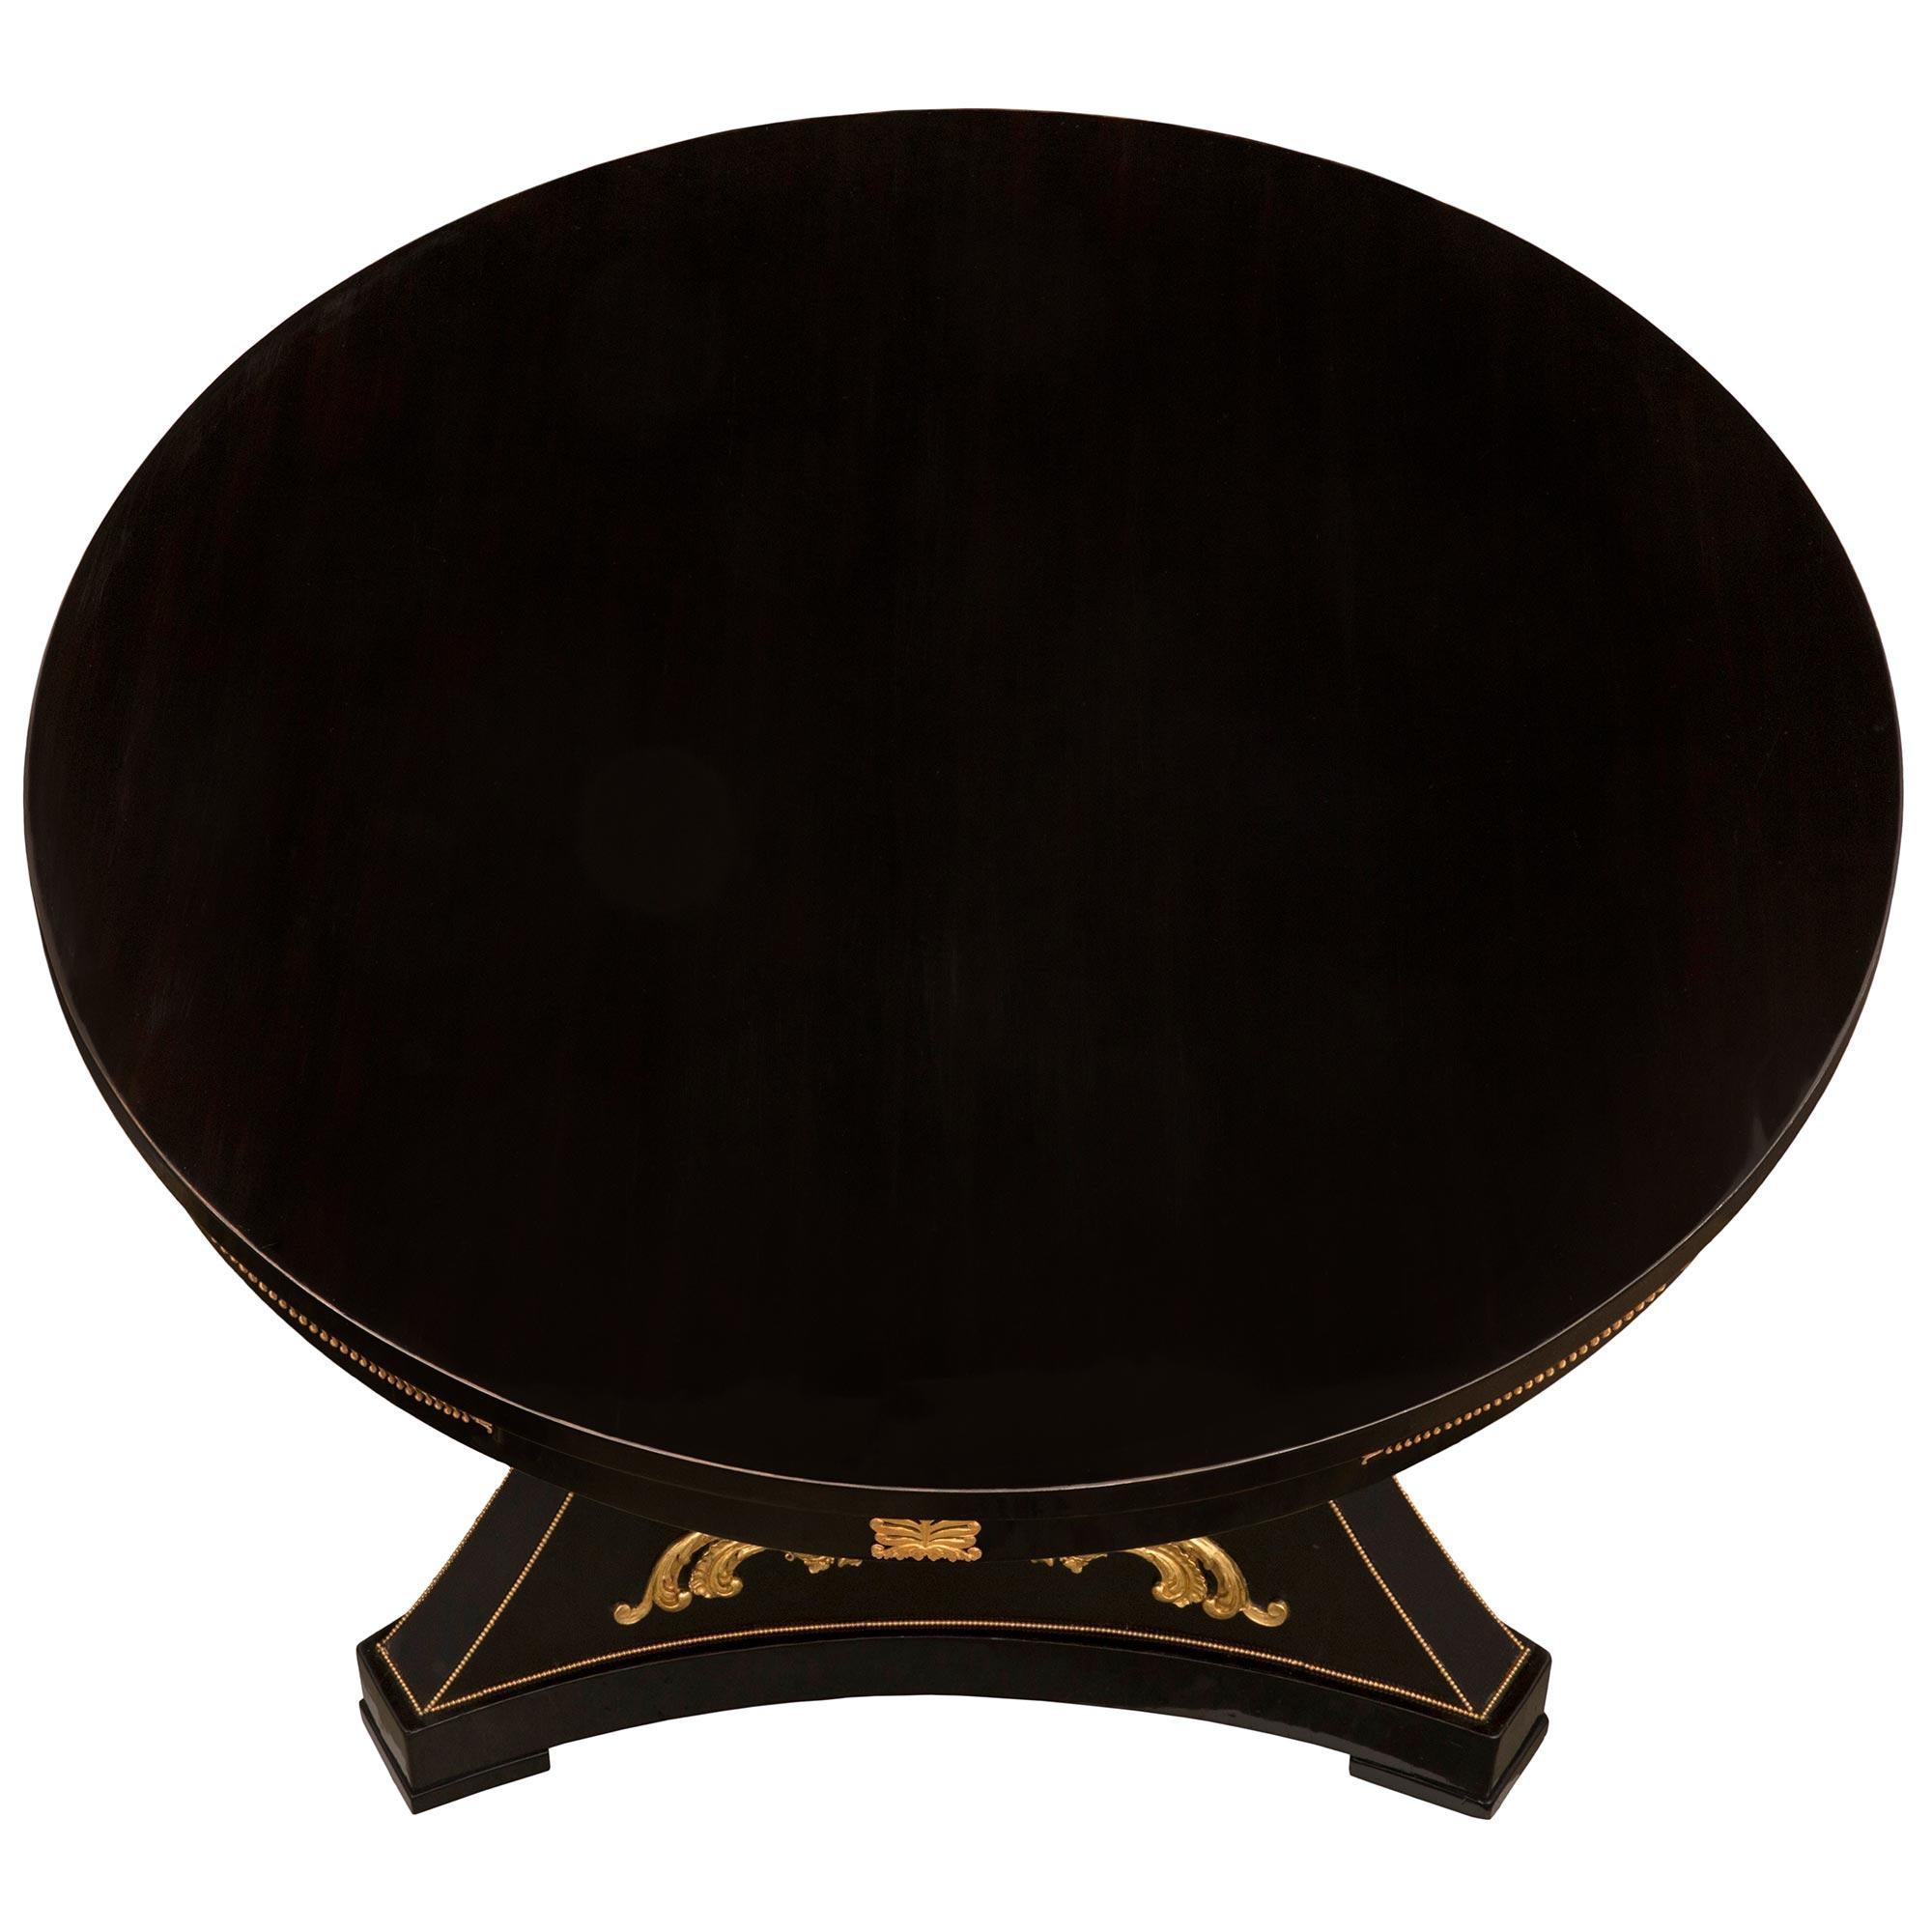 An impressive French 19th century Napoleon III period Ebony, ormolu, and giltwood center table. The circular table is raised by an elegantly curved triangular support with cut corners and concave sides all above the original casters. The support